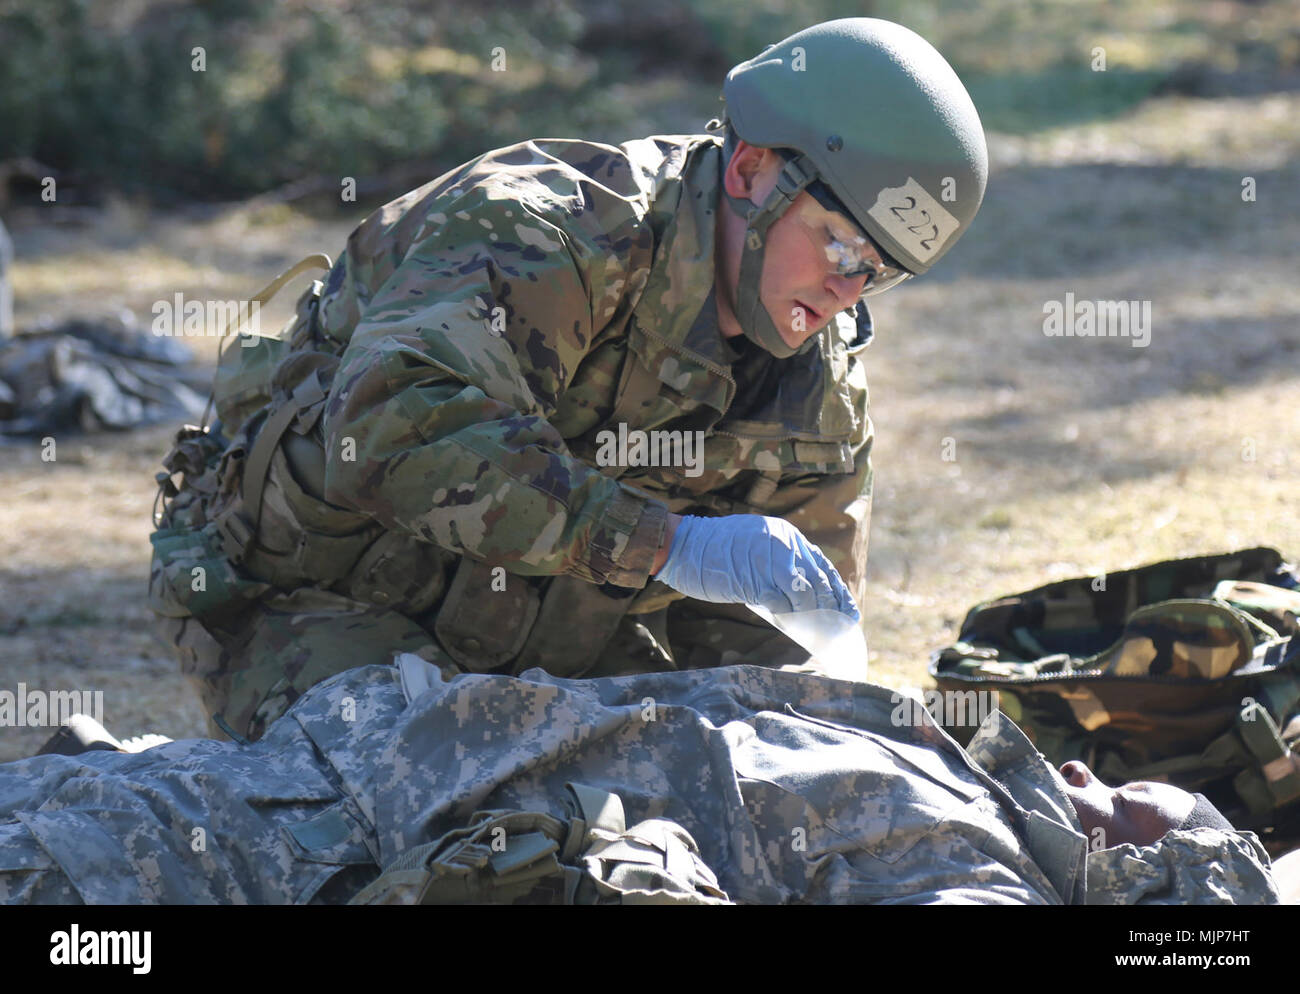 Spc. Matthew Holtz, medic from with 1st Battalion-503rd Infantry Regiment, 173rd Airborne Brigade, treats a penetrating chest wound on a simulated casualty, during U.S. Army Europe's Spring 2018 Expert Field Medical Badge testing, March 20, in Grafenwoehr, Germany. Holtz went on to be recognized as the honor graduate for the testing. Armed Forces and civilians displaying courage bravery dedication commitment and sacrifice Stock Photo